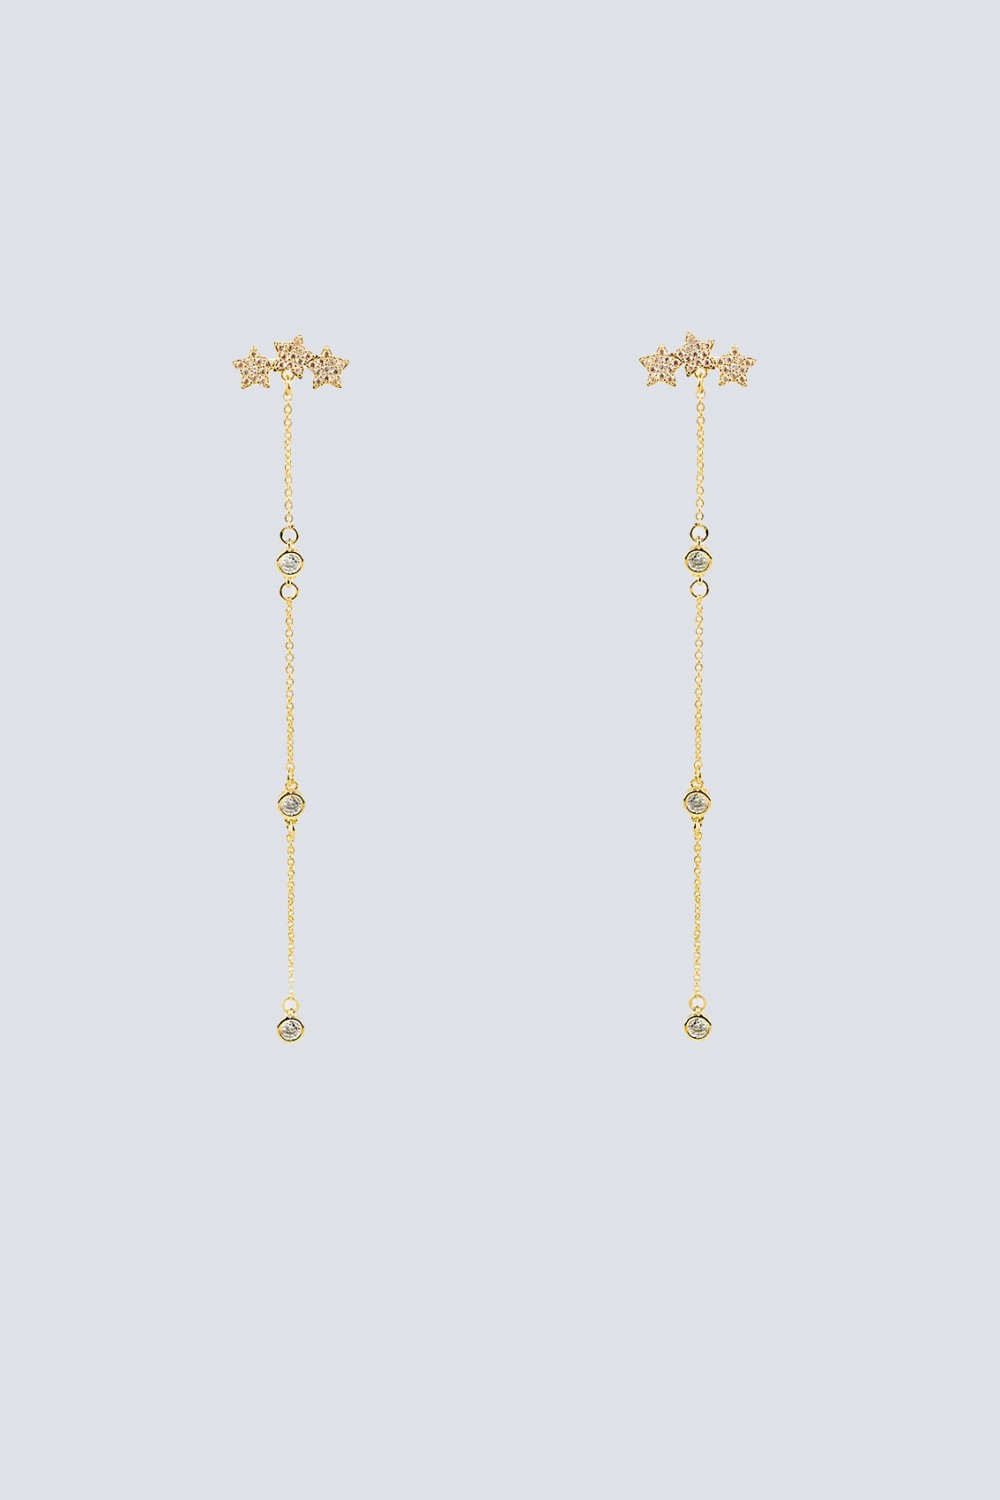 Long gold pendants with stars